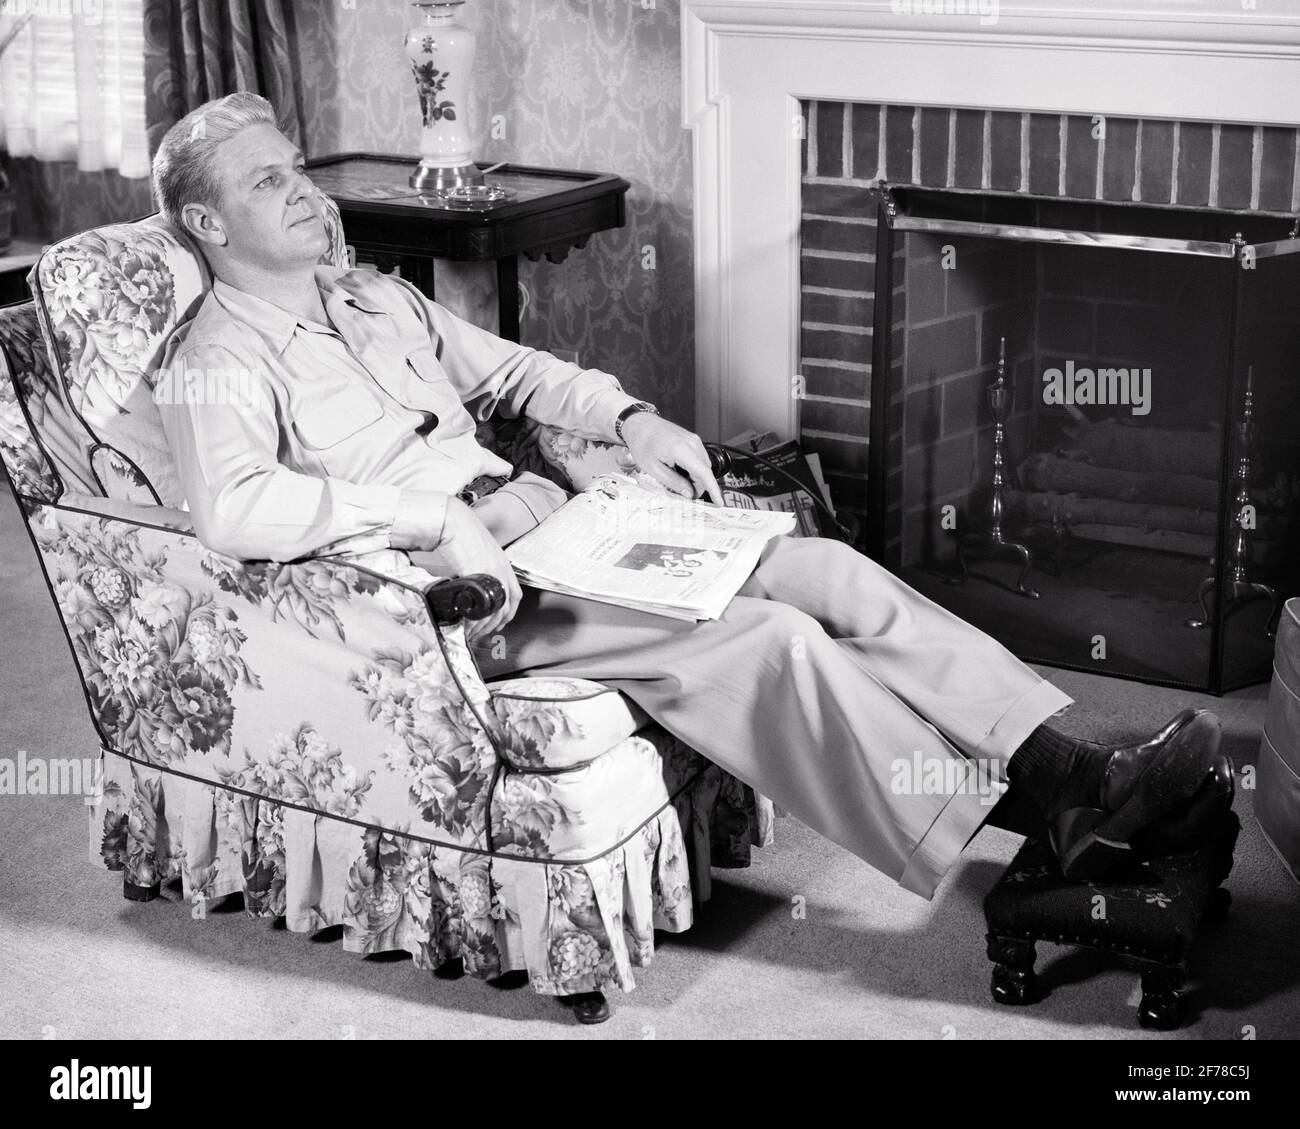 1950s MAN RESTING THINKING SITTING IN CHINTZ COVERED EASY CHAIR IN LIVING ROOM WITH NEWSPAPER FOLDED IN HIS LAP - s1073 HAR001 HARS REFLECTIVE THINK EASY CHAIR IN REFLECTING PONDER PONDERING CONSIDER LOST IN THOUGHT EASY FOOTSTOOL UPHOLSTERY CHINTZ CONTEMPLATIVE MEDITATE MEDITATIVE MID-ADULT MID-ADULT MAN RELAXATION REST BLACK AND WHITE CAUCASIAN ETHNICITY CONSIDERING HAR001 OLD FASHIONED Stock Photo